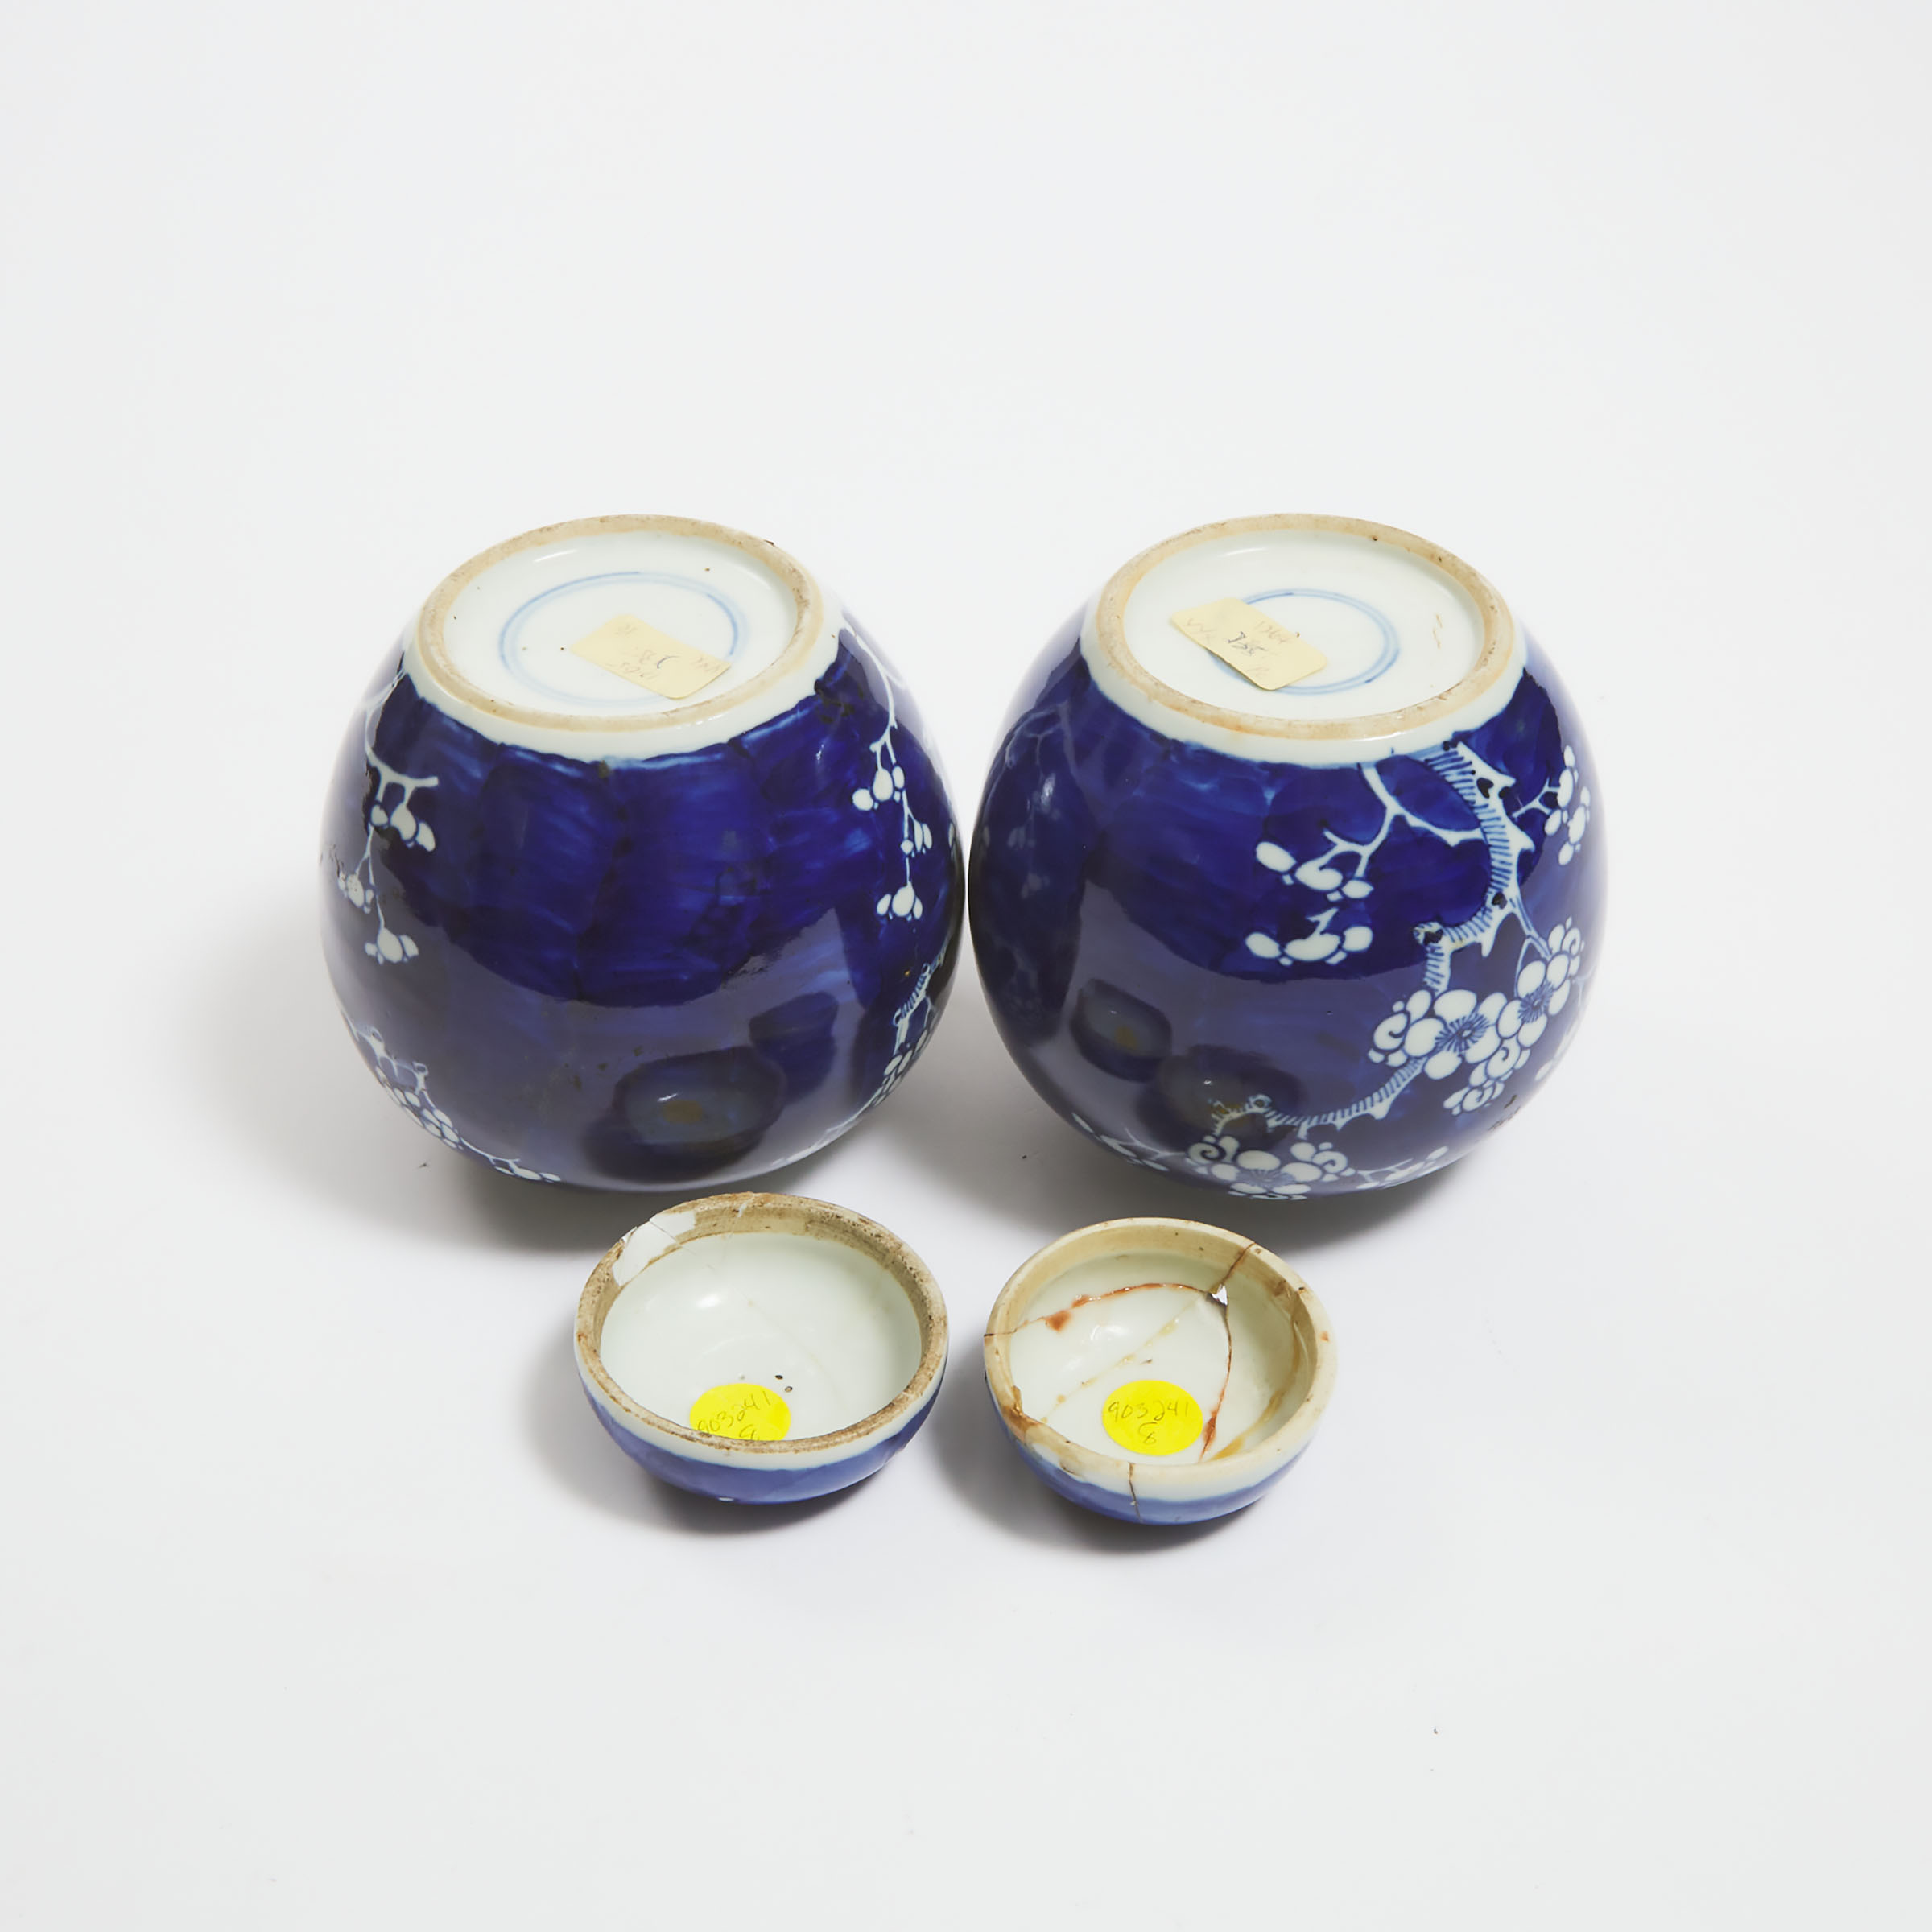 A Pair of Blue and White 'Prunus' Lidded Jars, Together With a Pair of Planters, 19th/Early 20th Century